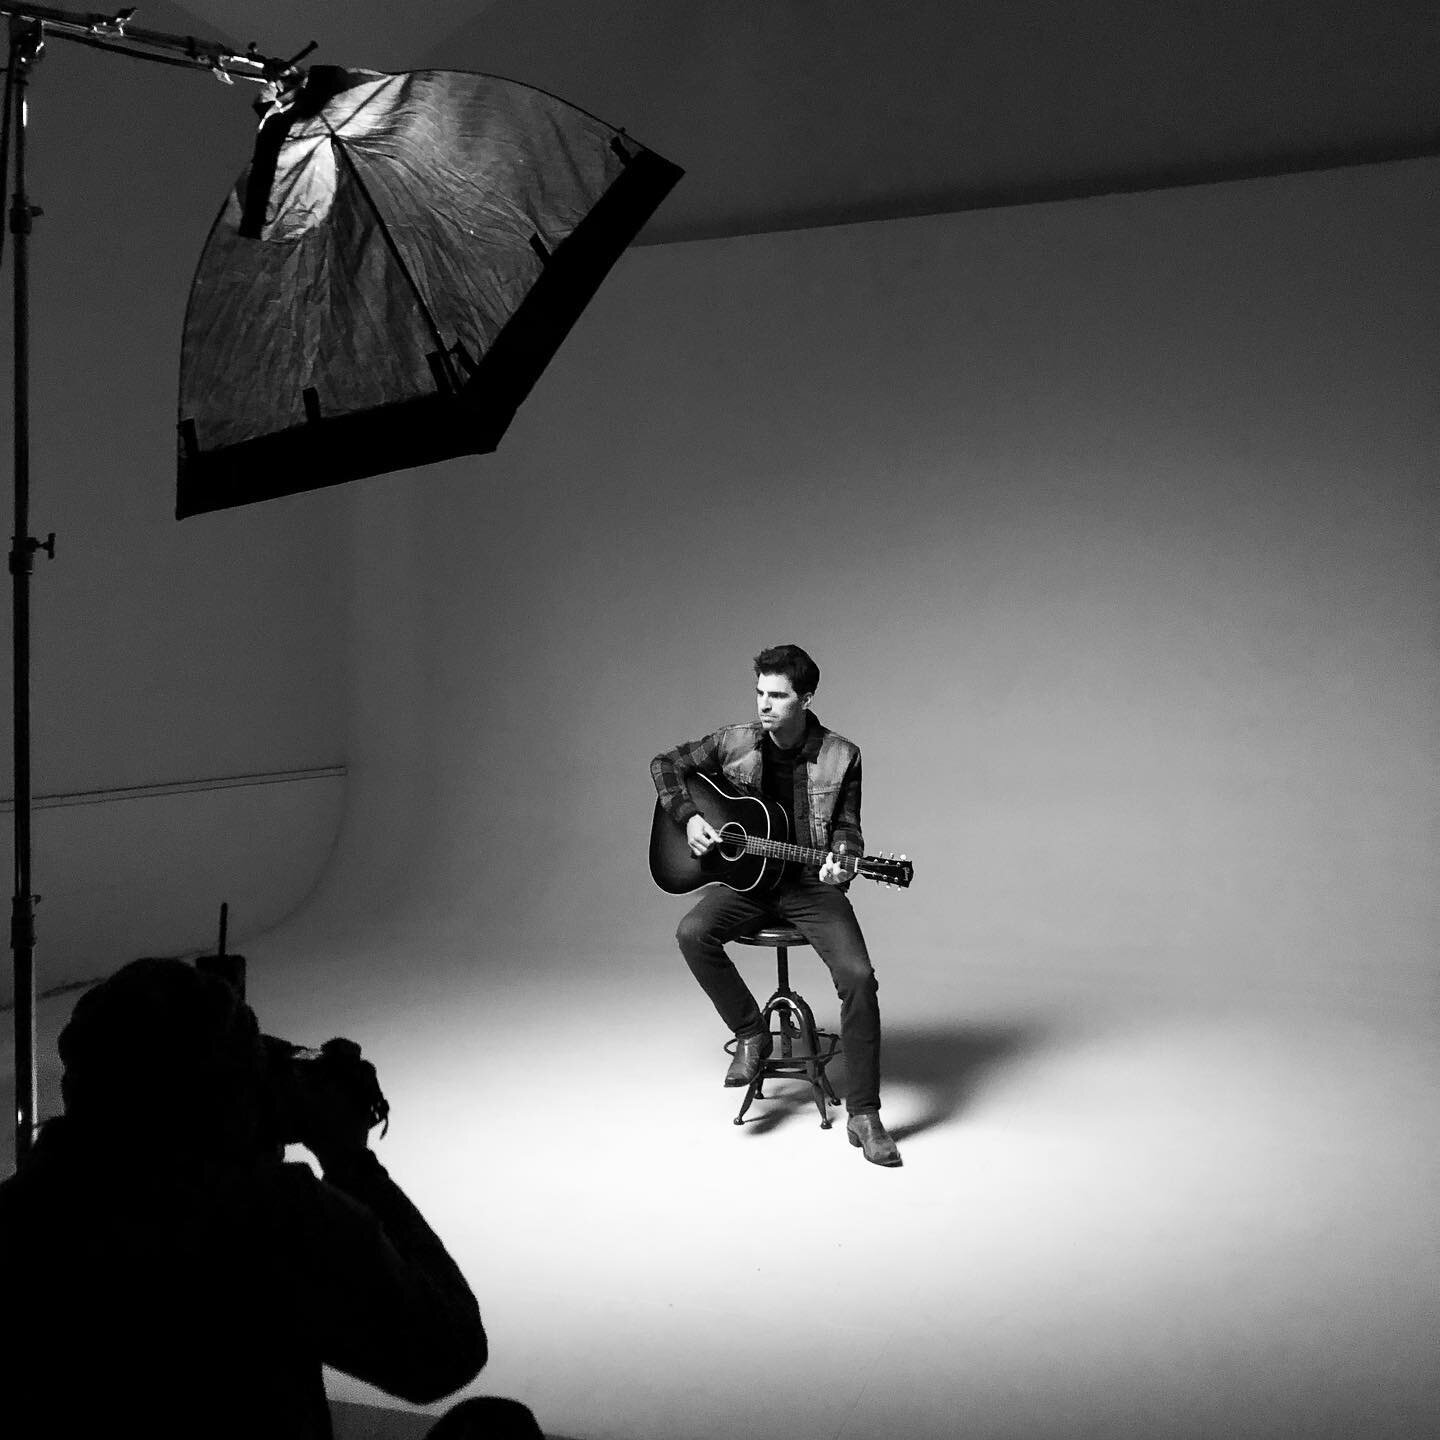 Our very own @mitch_rossell in the studio with the talented @robbysphotos capturing some magic today!